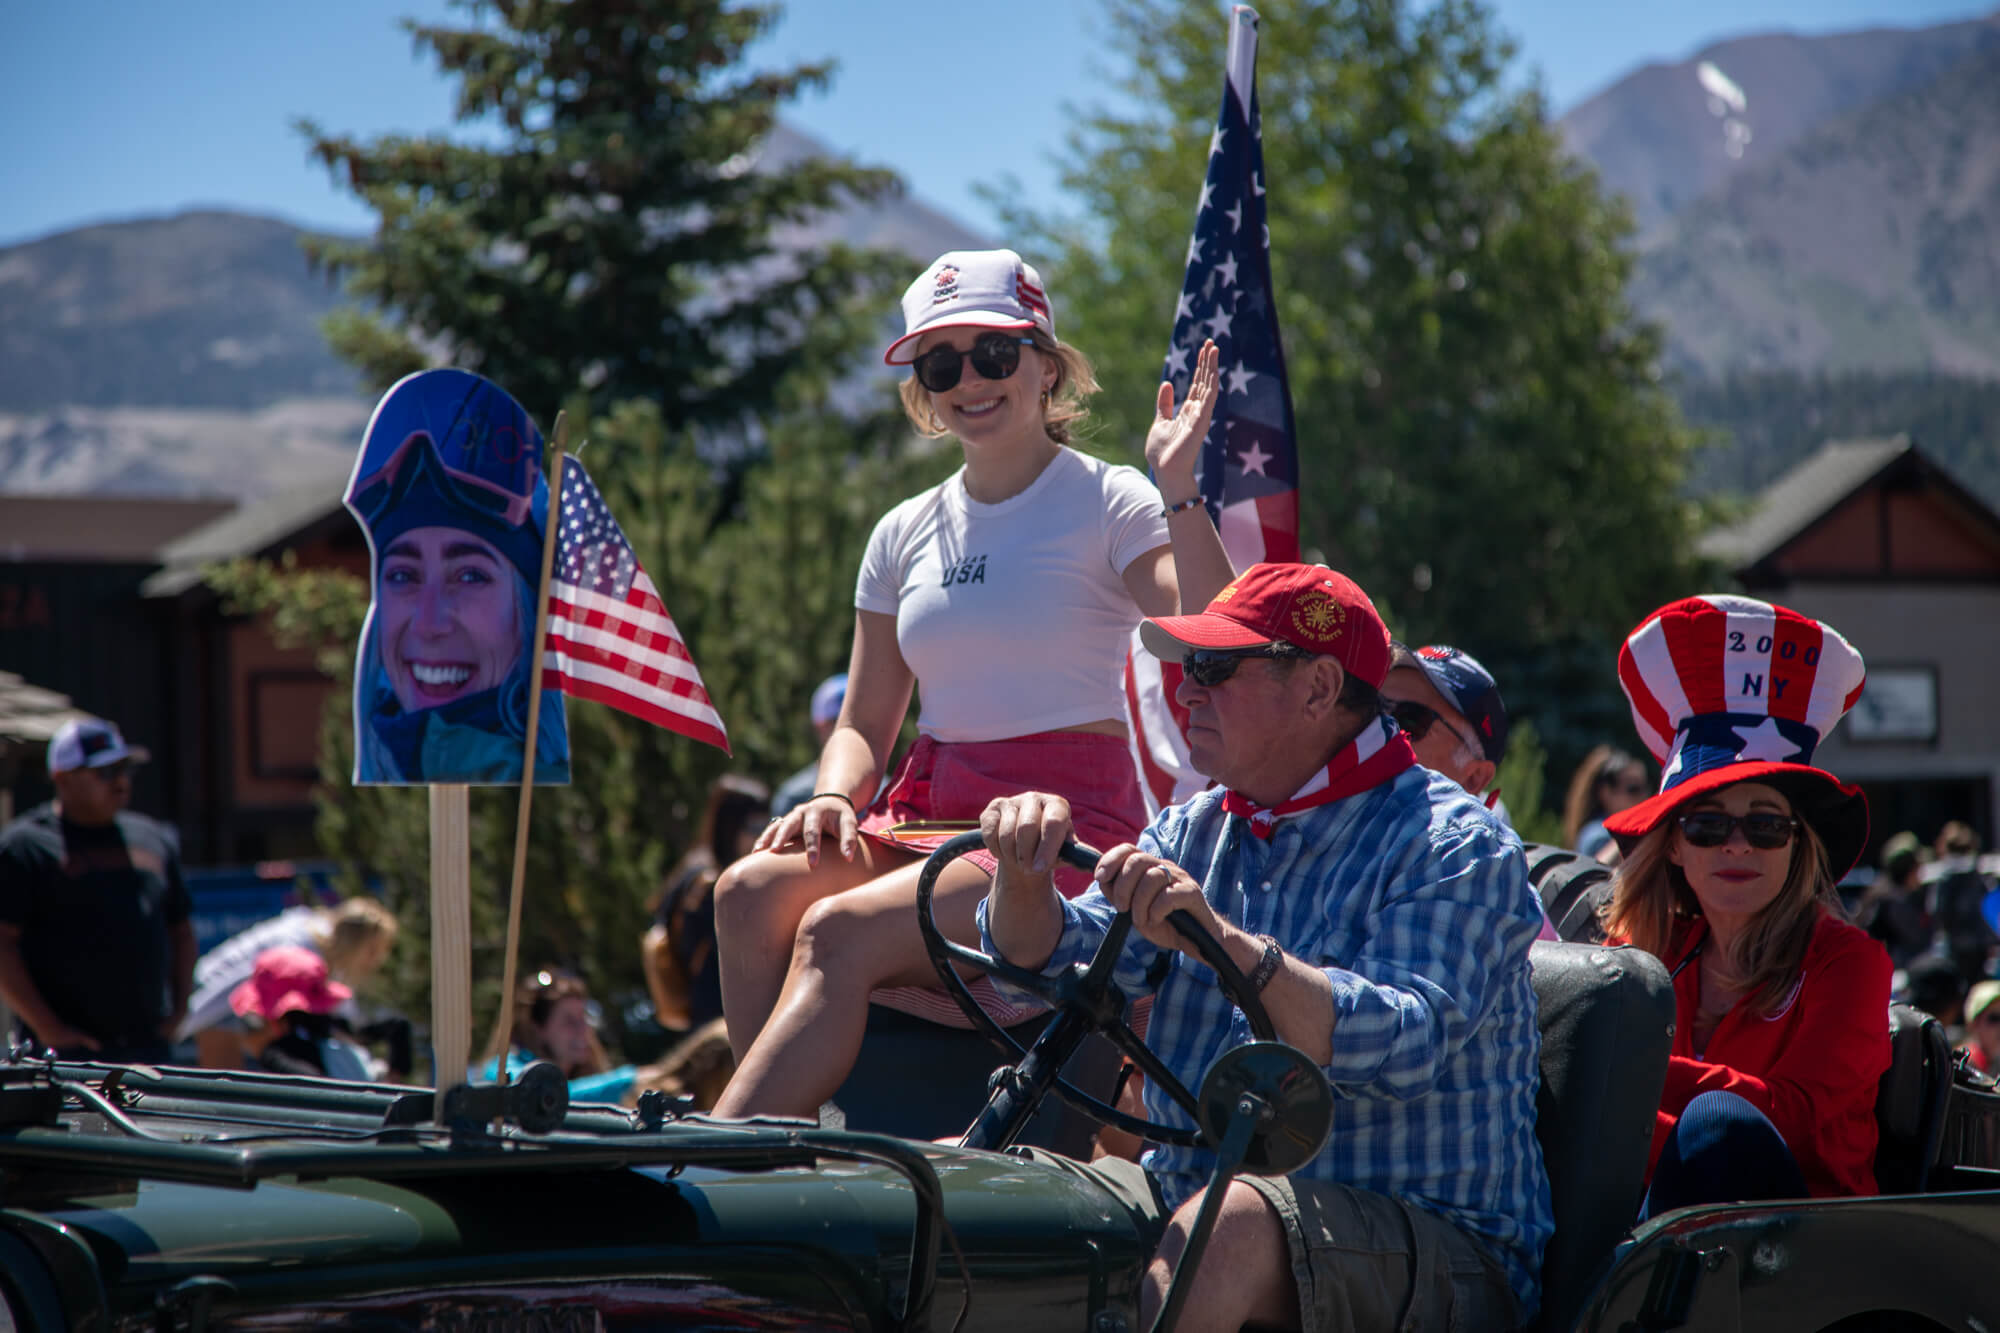 Grand marshal Carly Margulies waves while she's driven along the parade route in a vintage car